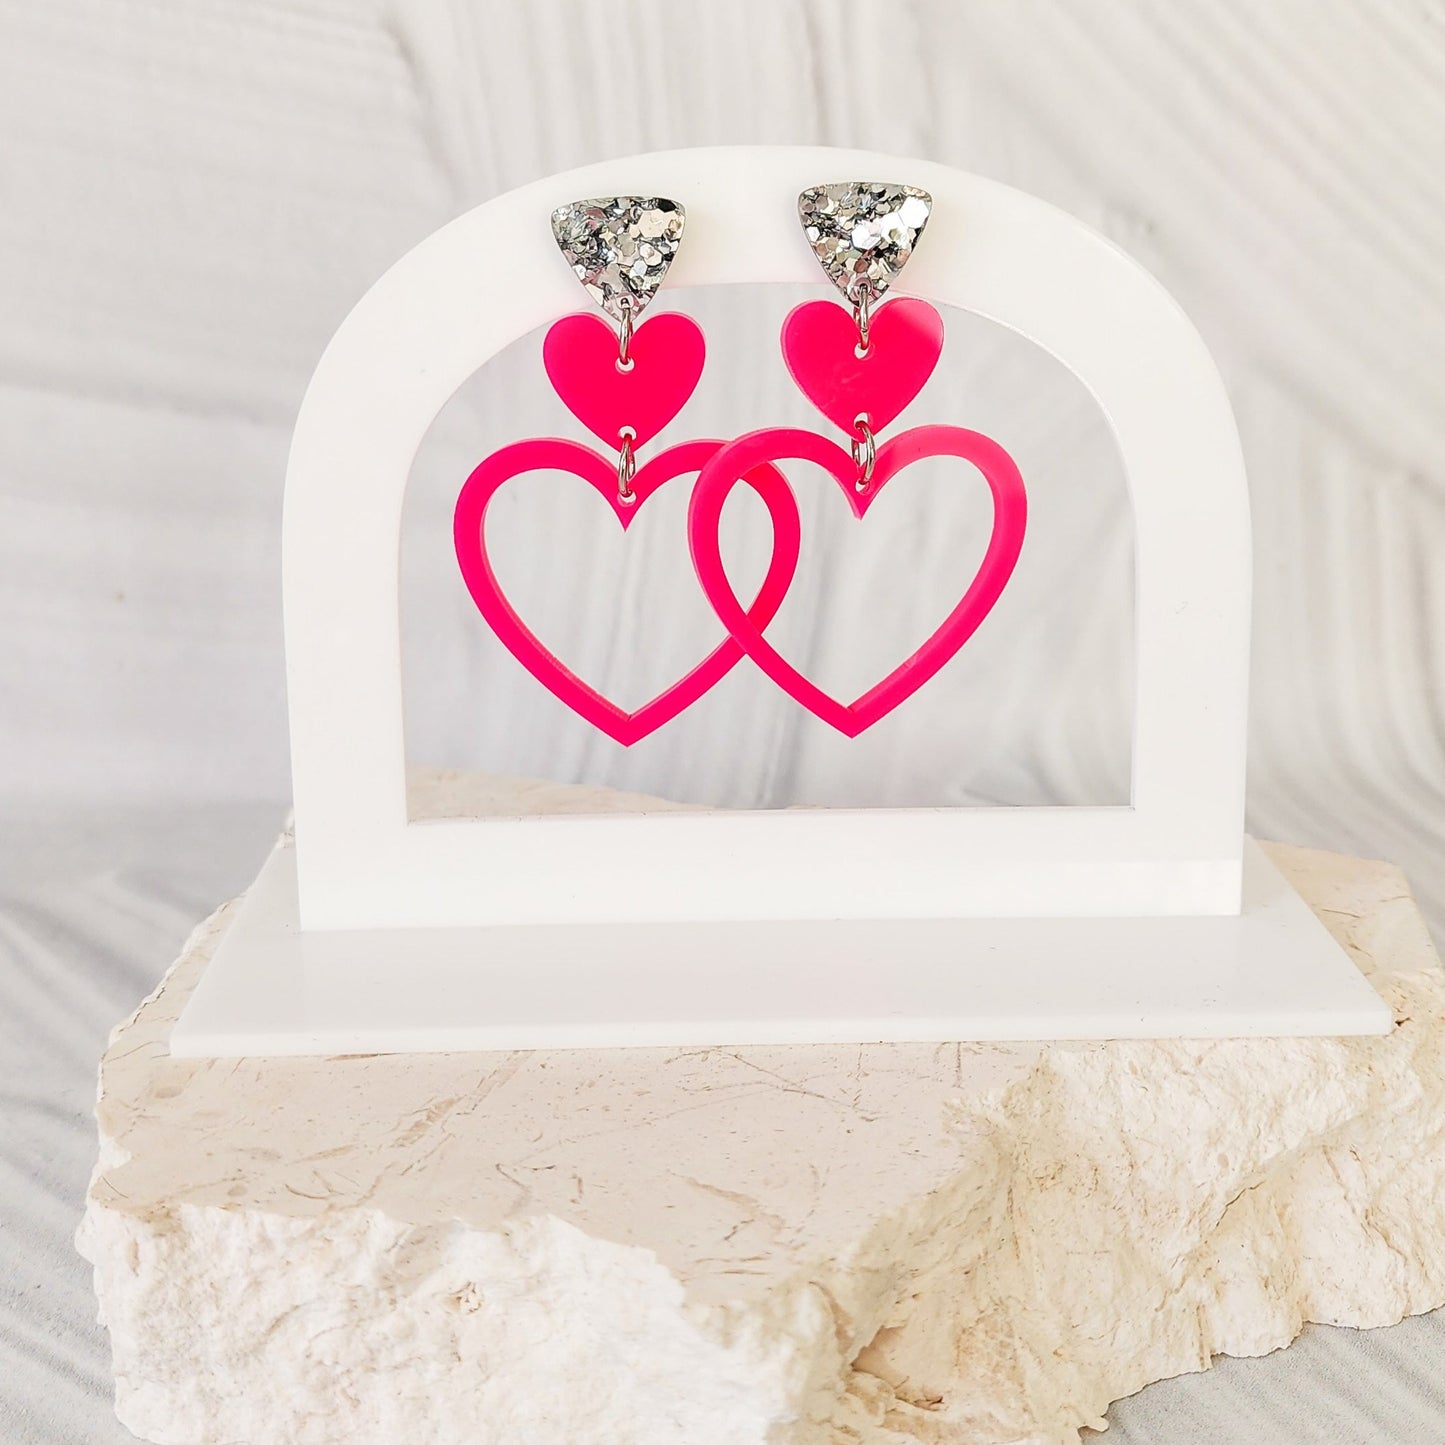 'Let's Go Party' Heart Hoops